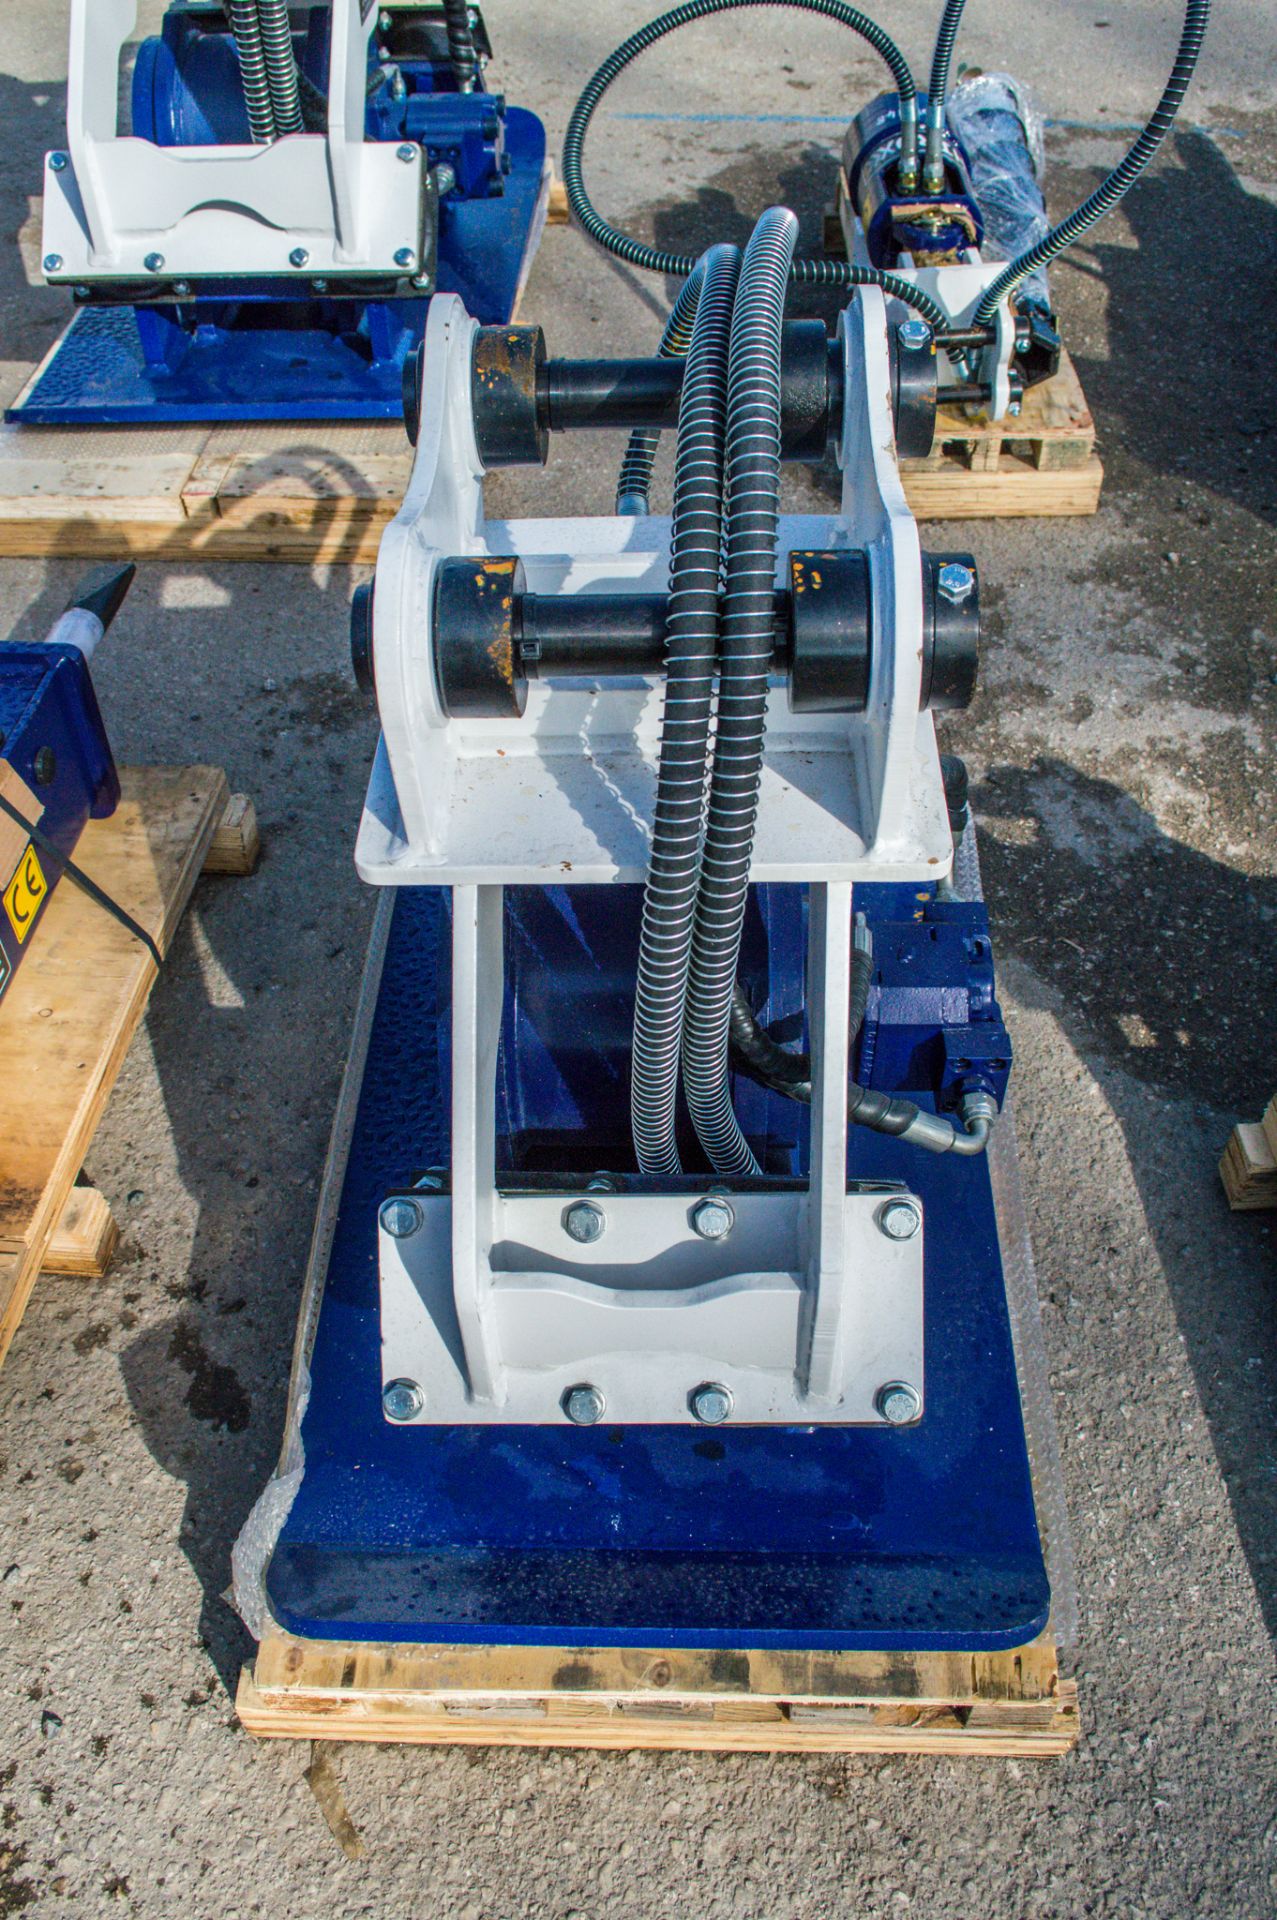 Hirox hydraulic compactor plate to suit 5-9 tonne excavator ** New and unused ** - Image 3 of 4